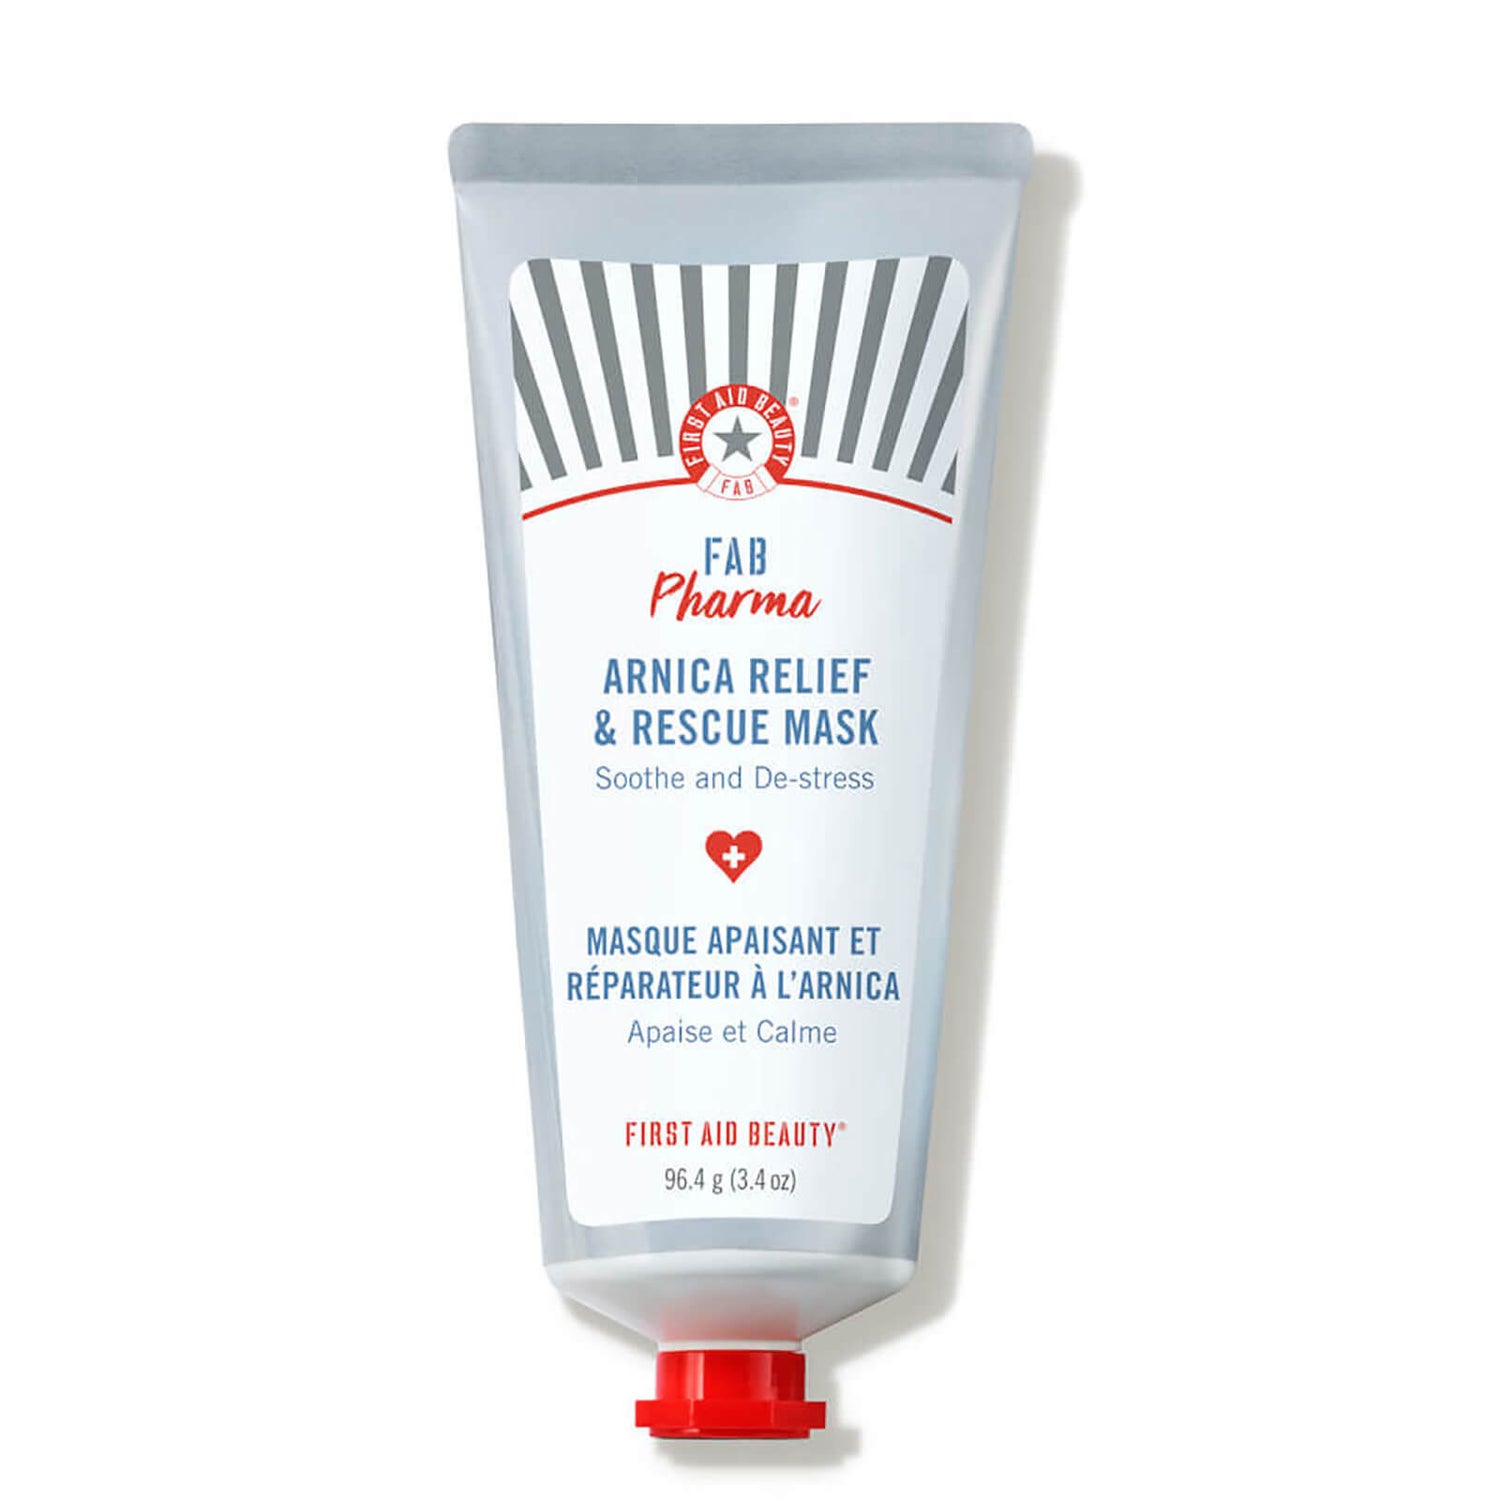 First Aid Beauty Pharma Arnica Relief Rescue Mask (3.4 oz.)